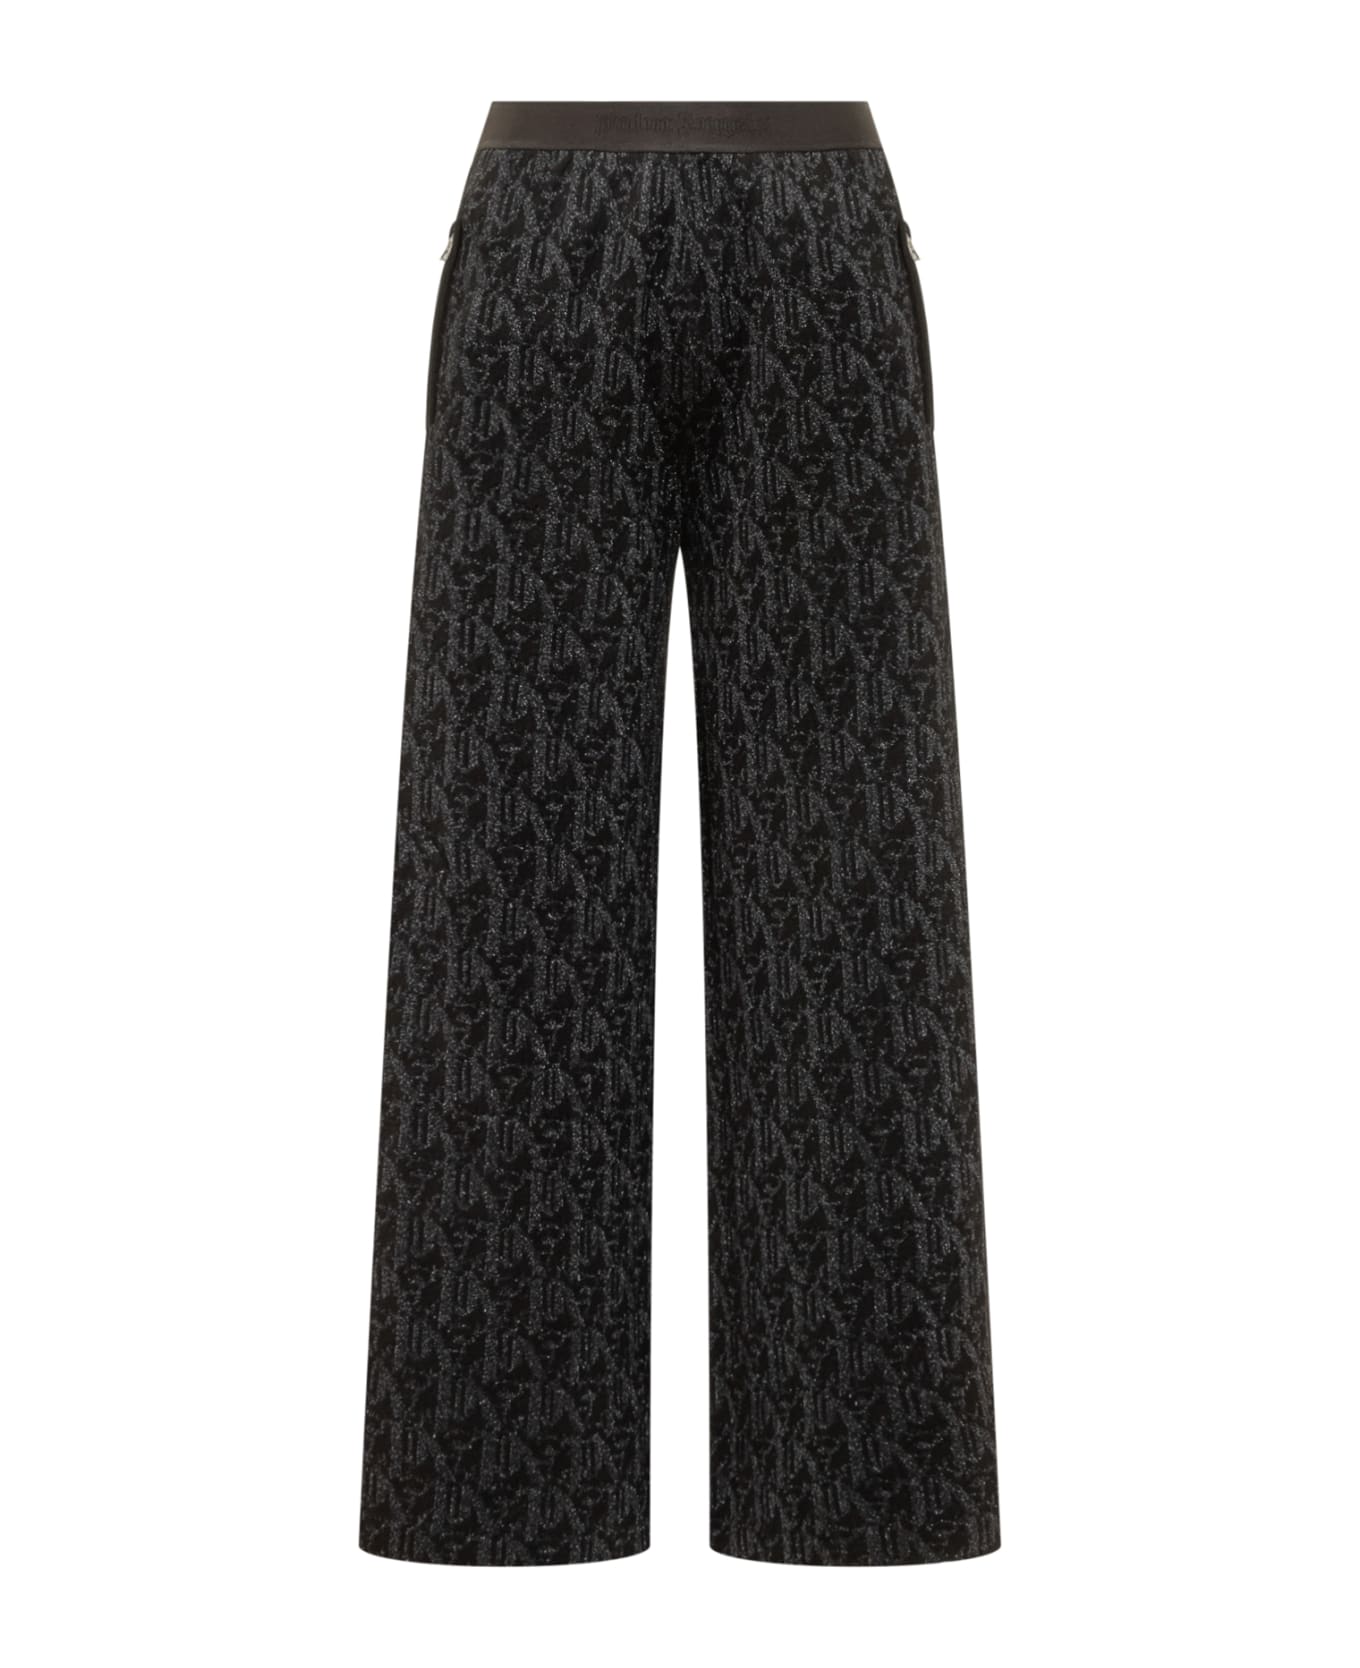 Palm Angels Monogram Jord Knit Wide Trousers - BLACK ボトムス